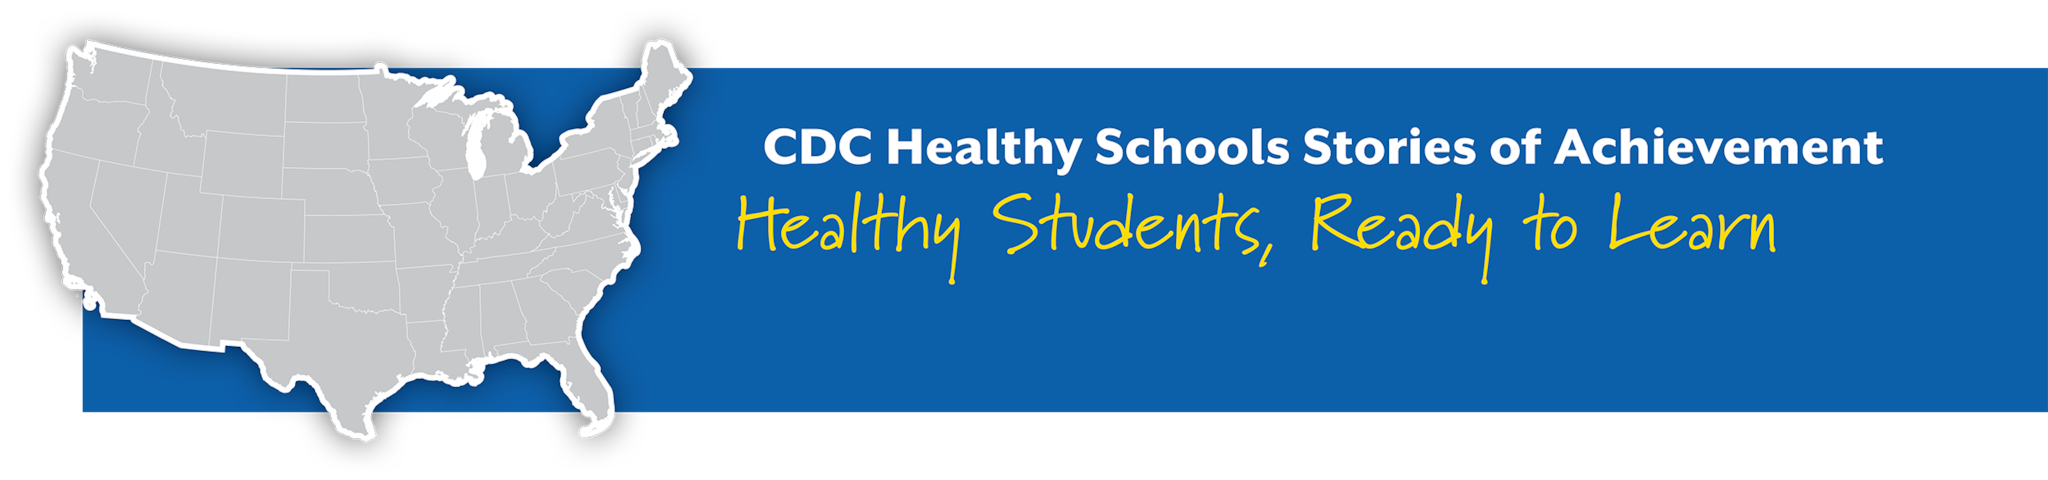 CDC Healthy Schools Stories of Achievement, Healthy Students, Ready to Learn Banner Image